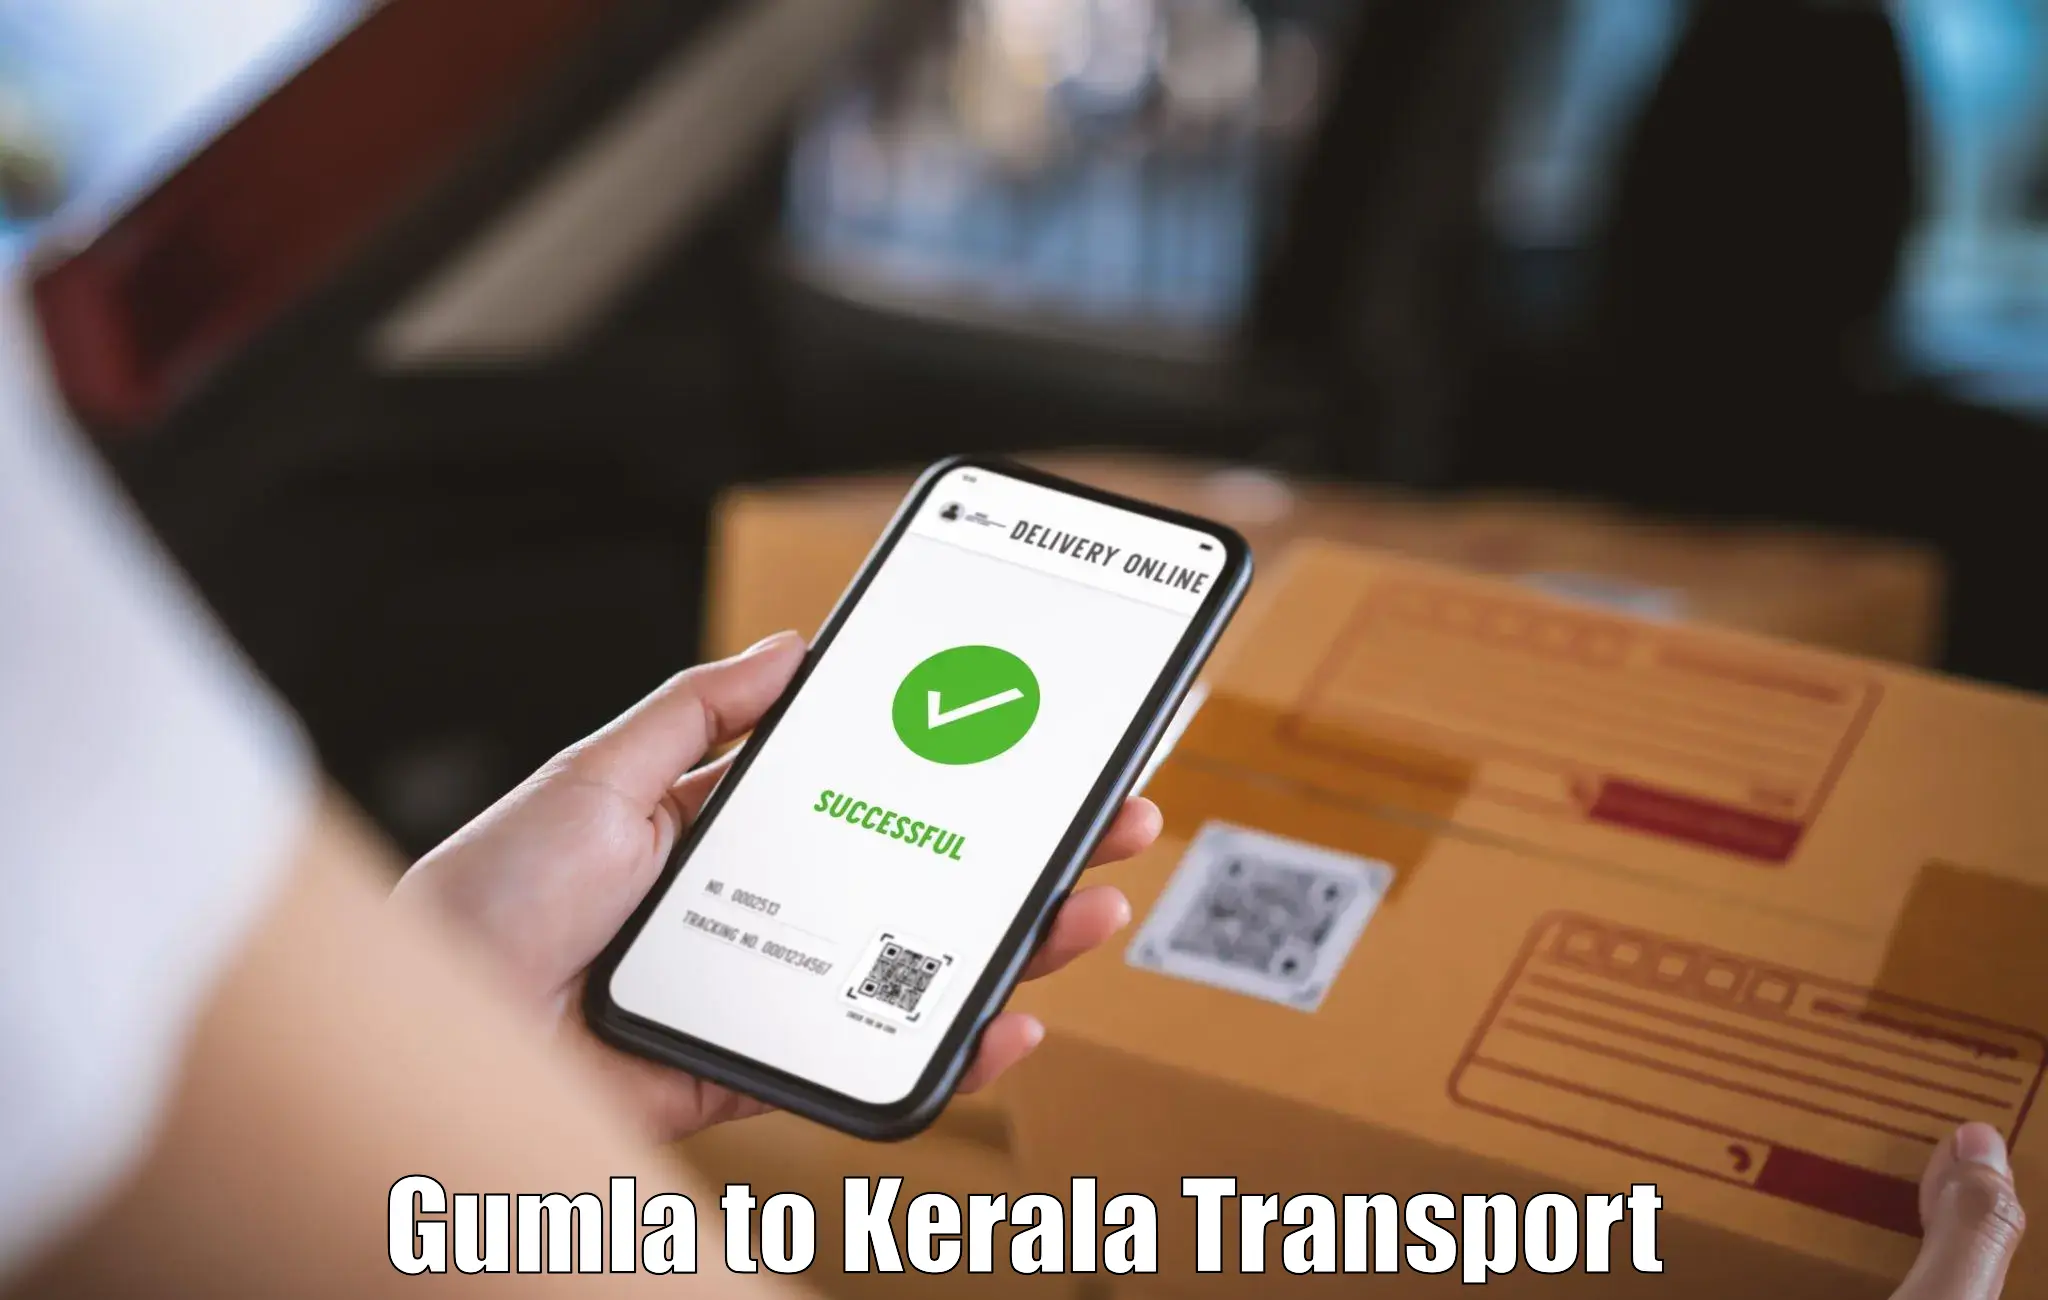 Scooty transport charges Gumla to Cherthala